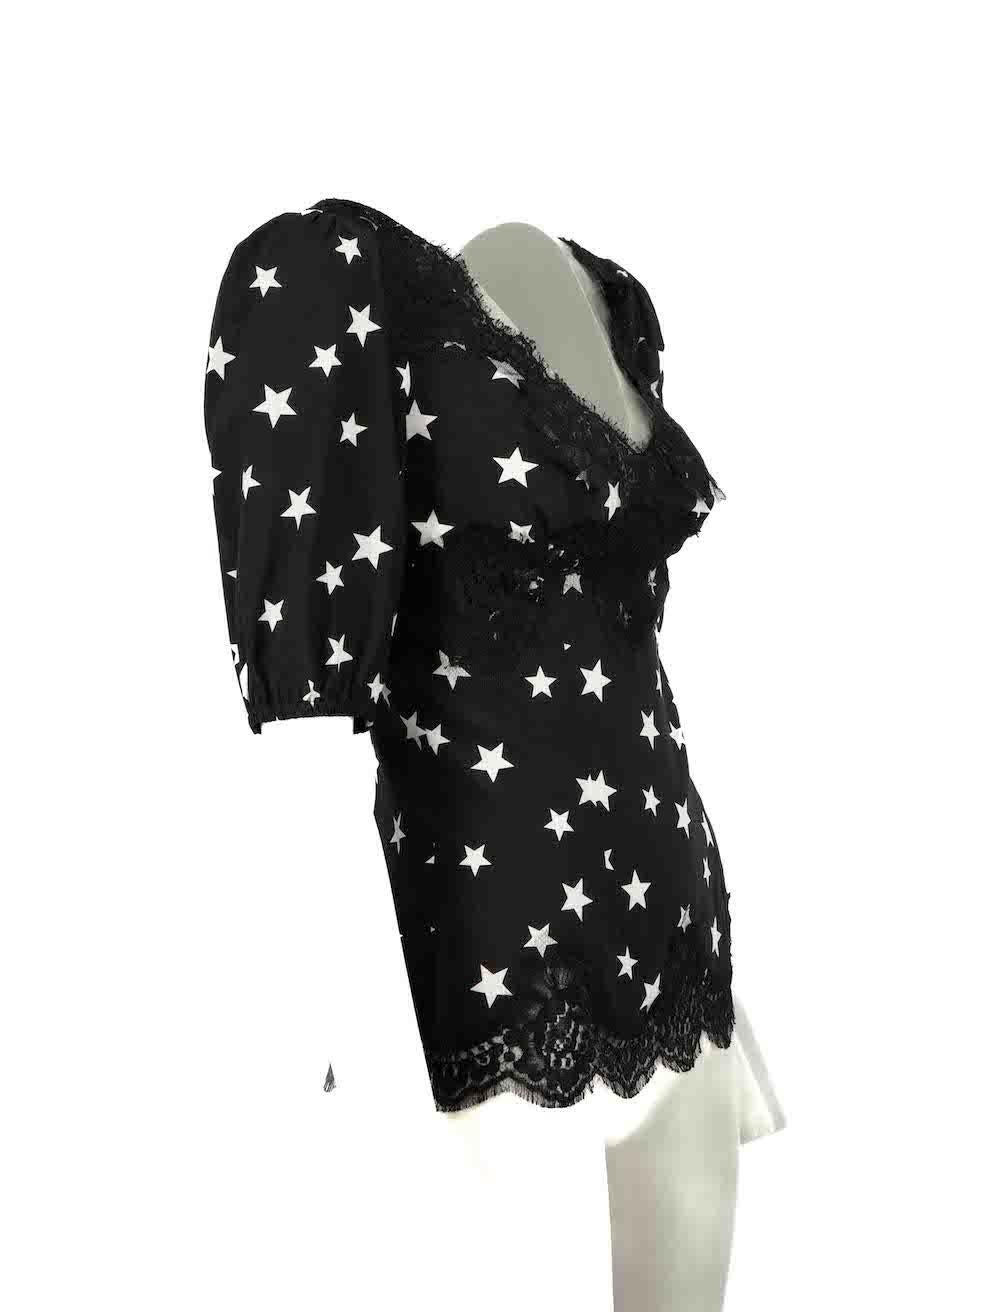 CONDITION is Never worn. No visible wear to top is evident on this new Dolce & Gabbana designer resale item.

Details
Black
Silk
Mid sleeves blouse
Star print pattern
Lace trim
Slightly see through
V neckline
Side zip closure
 
Made in Italy
